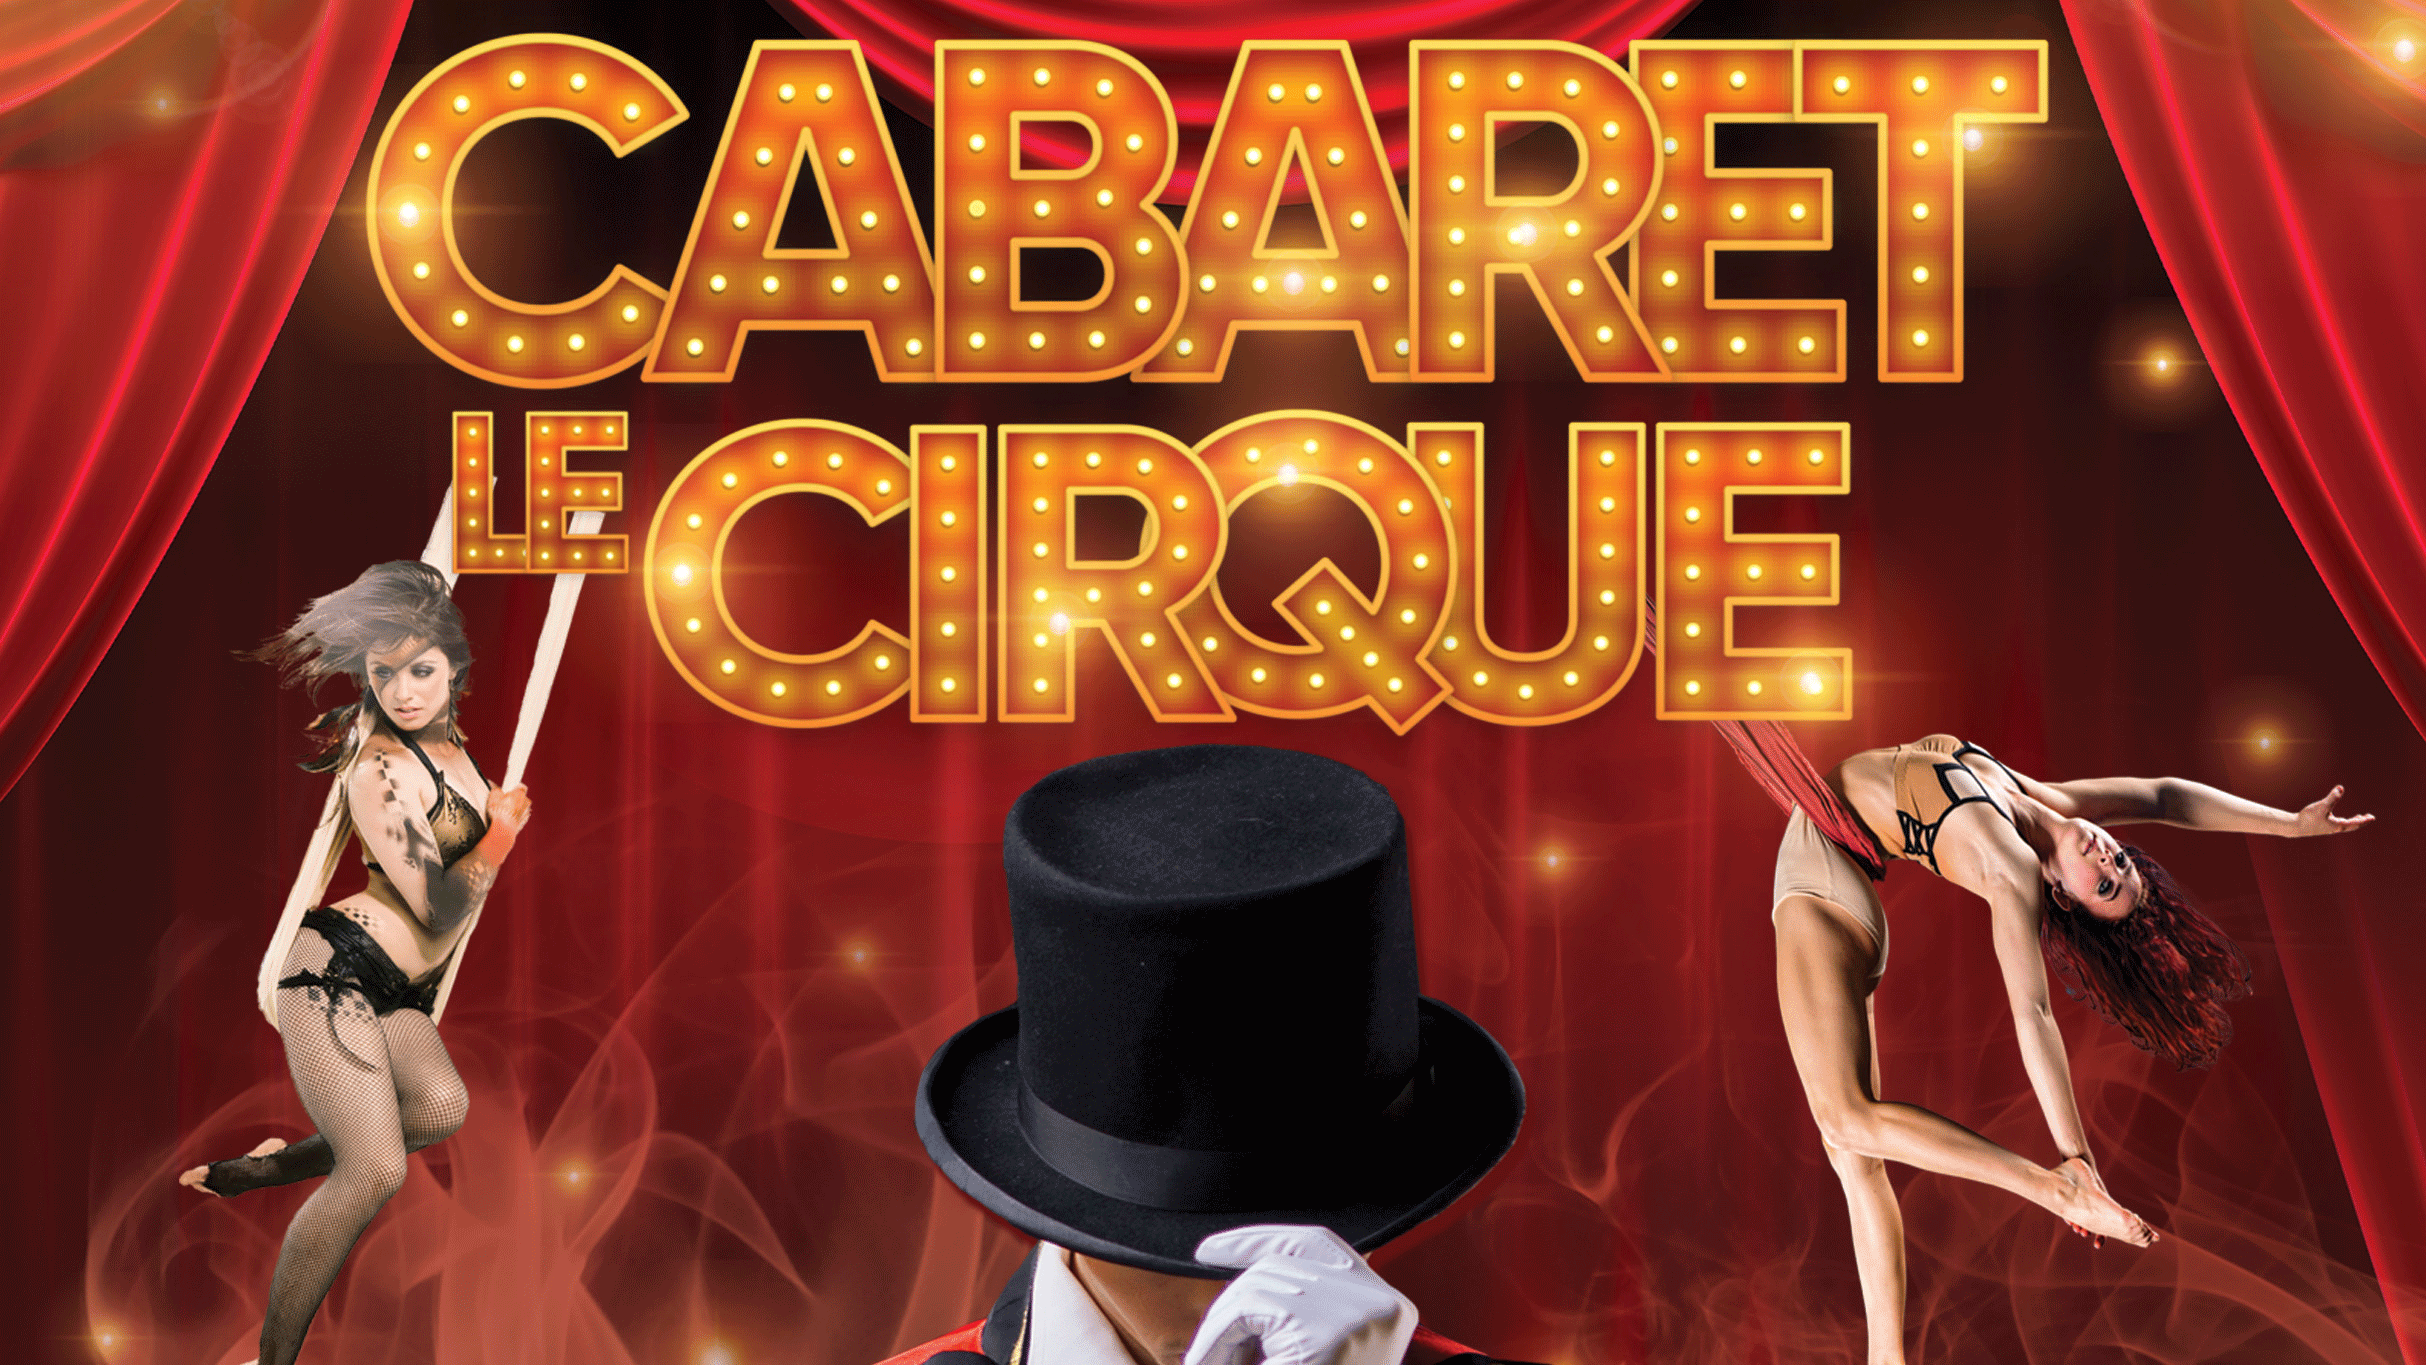 Cabaret Le Cirque in Niagara Falls promo photo for Official Platinum Onsale presale offer code